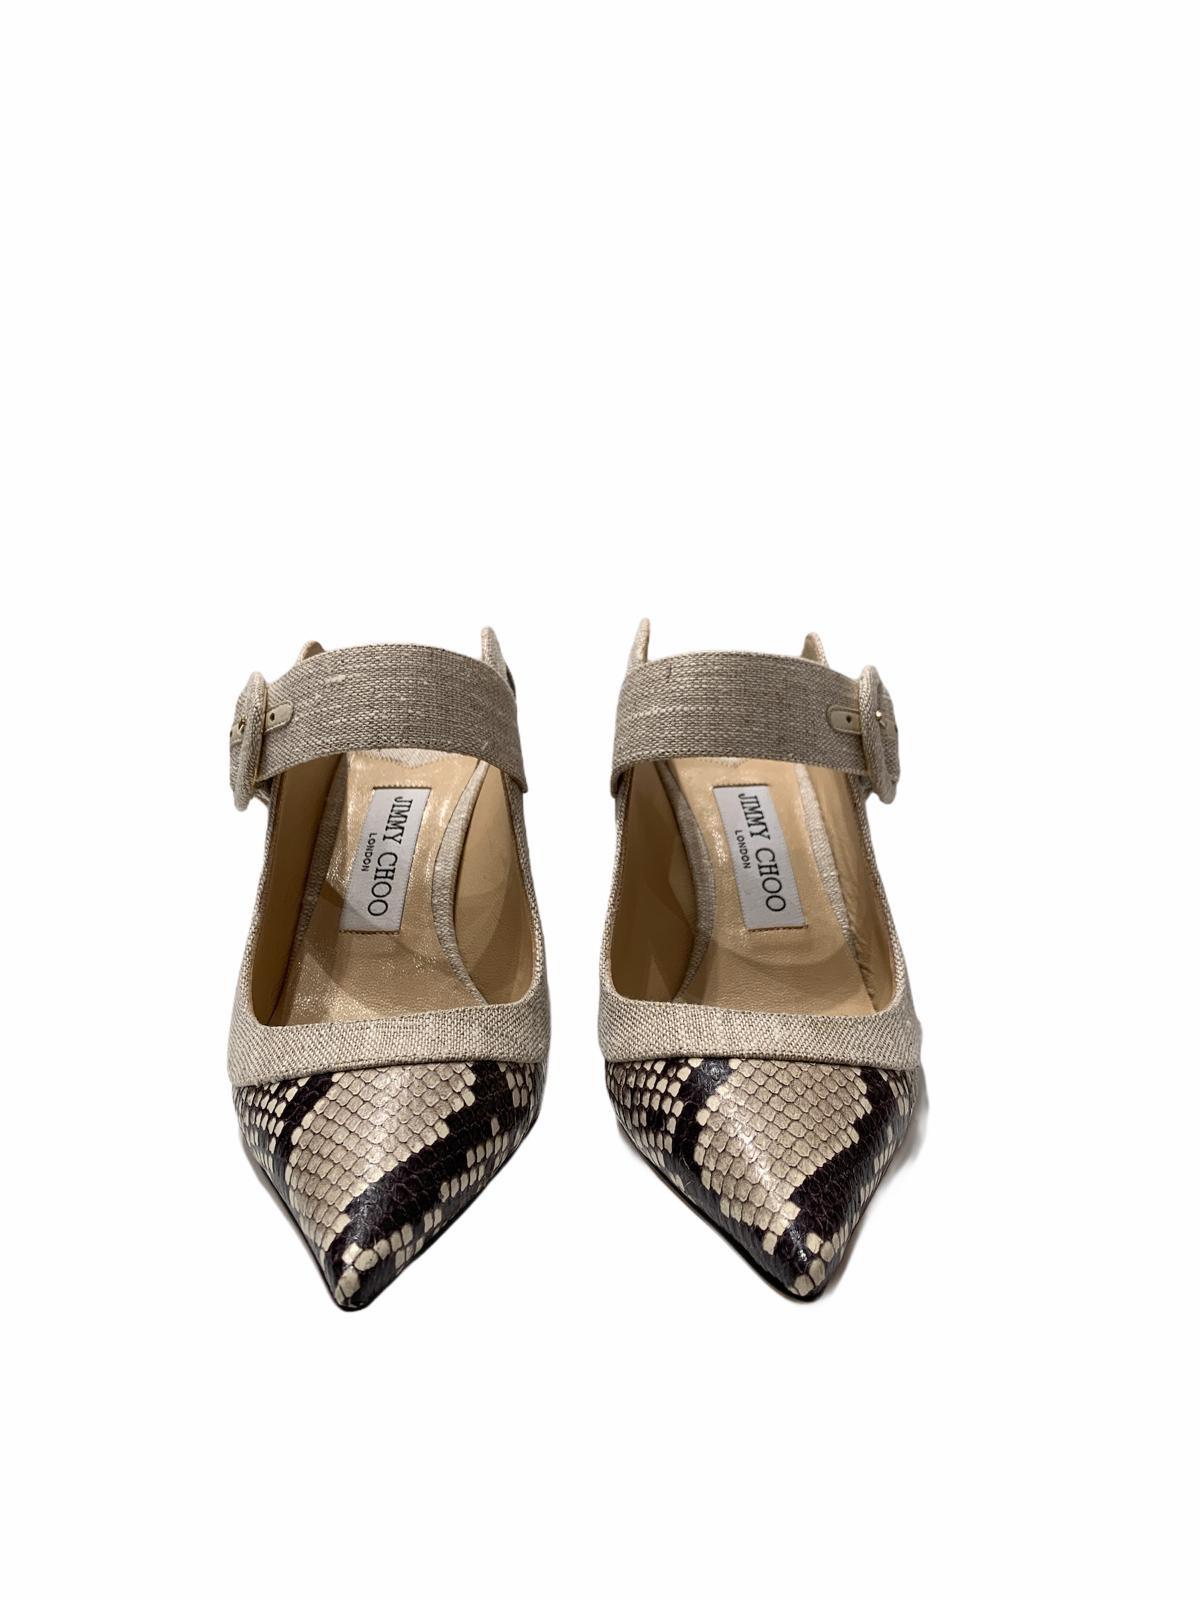 Brown Jimmy Choo Python Leather Shoes  For Sale